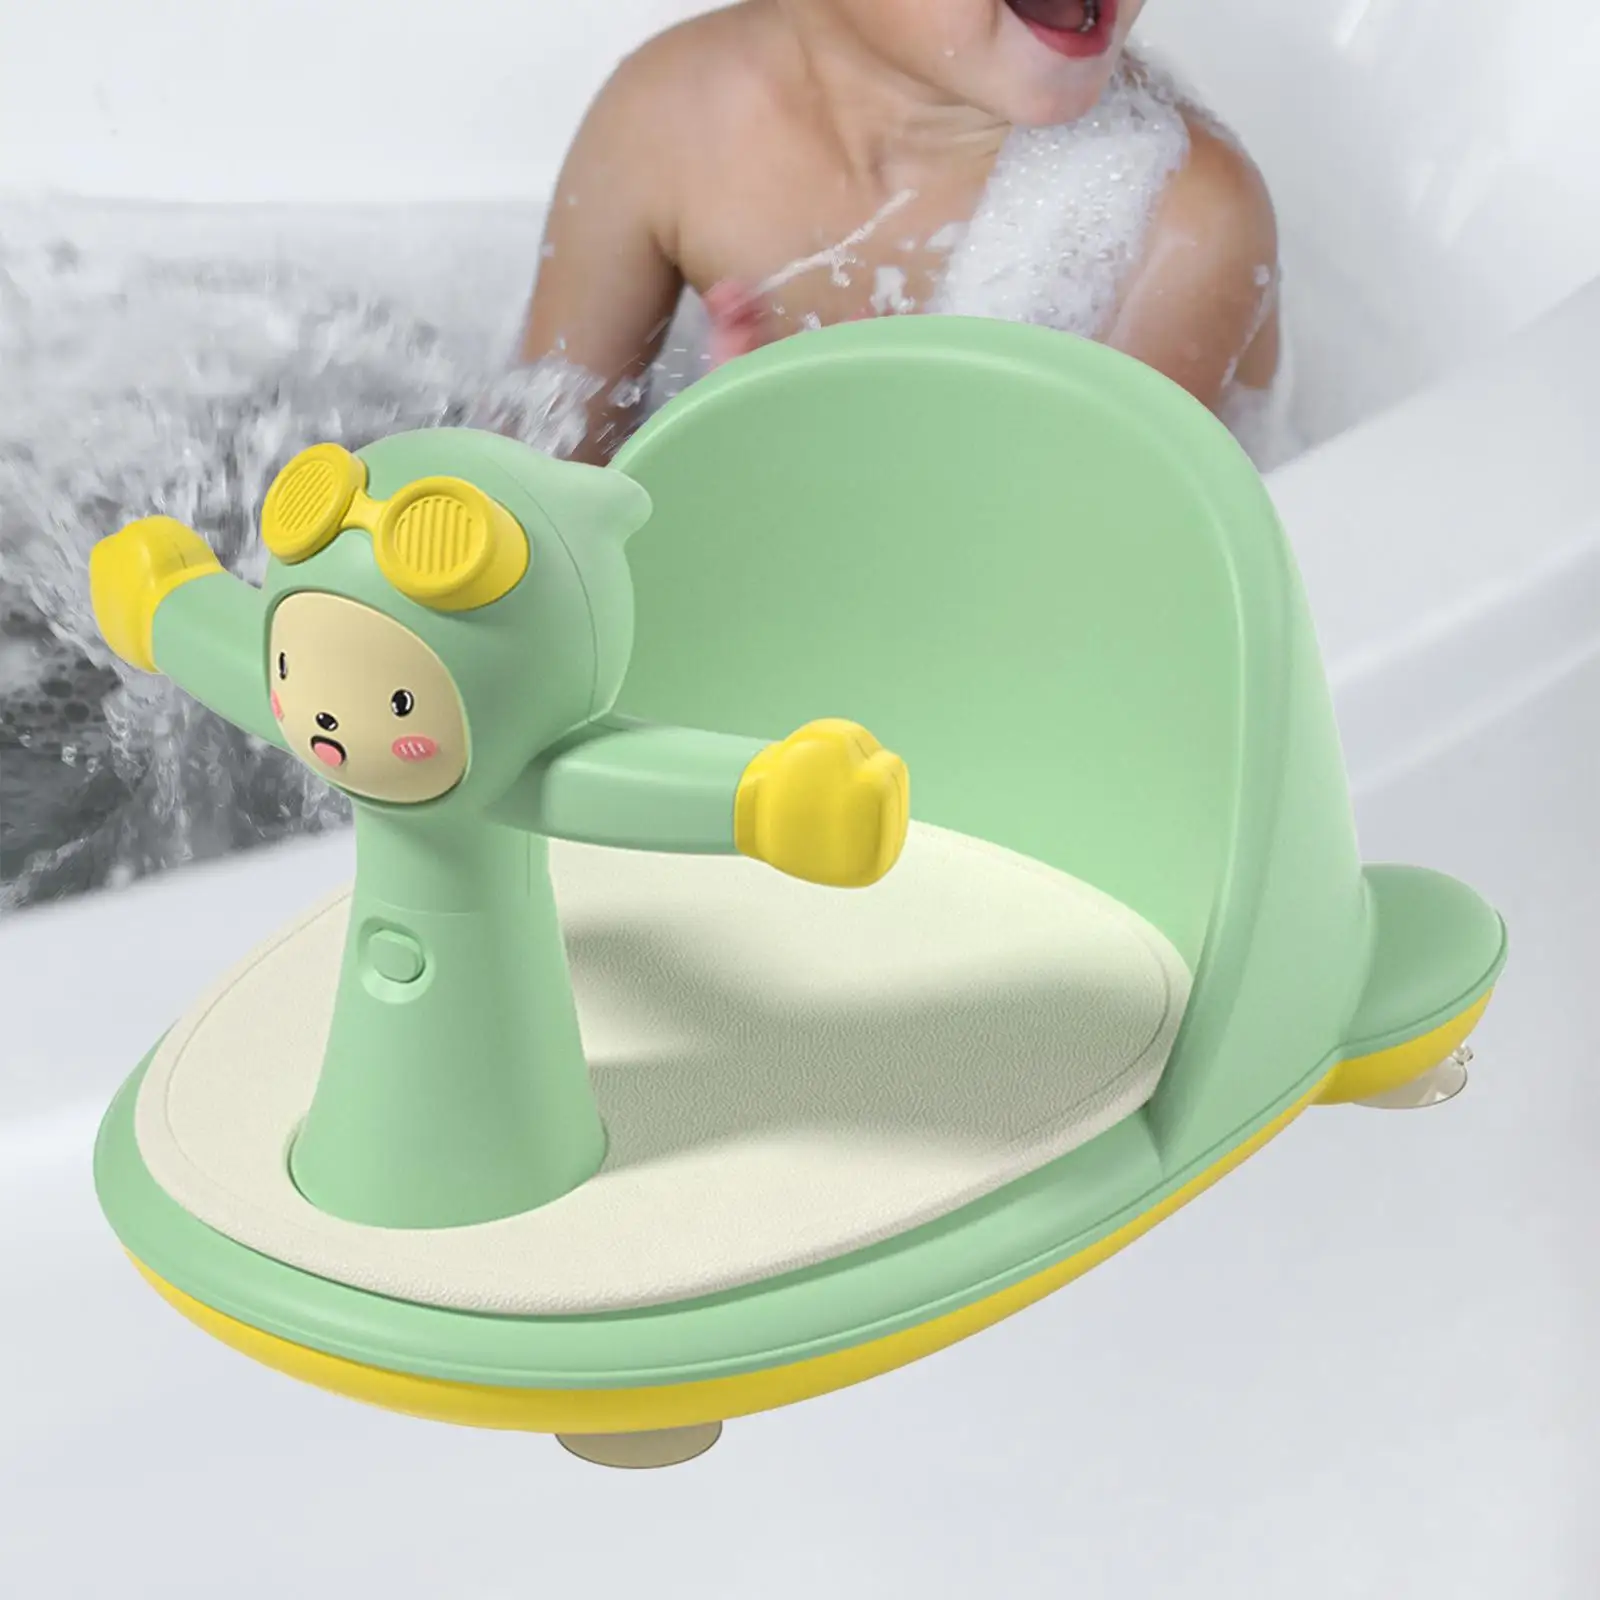 Baby Bath Tub Seat stable Easy to Clean Leather Mat with Suction Cups Does Not